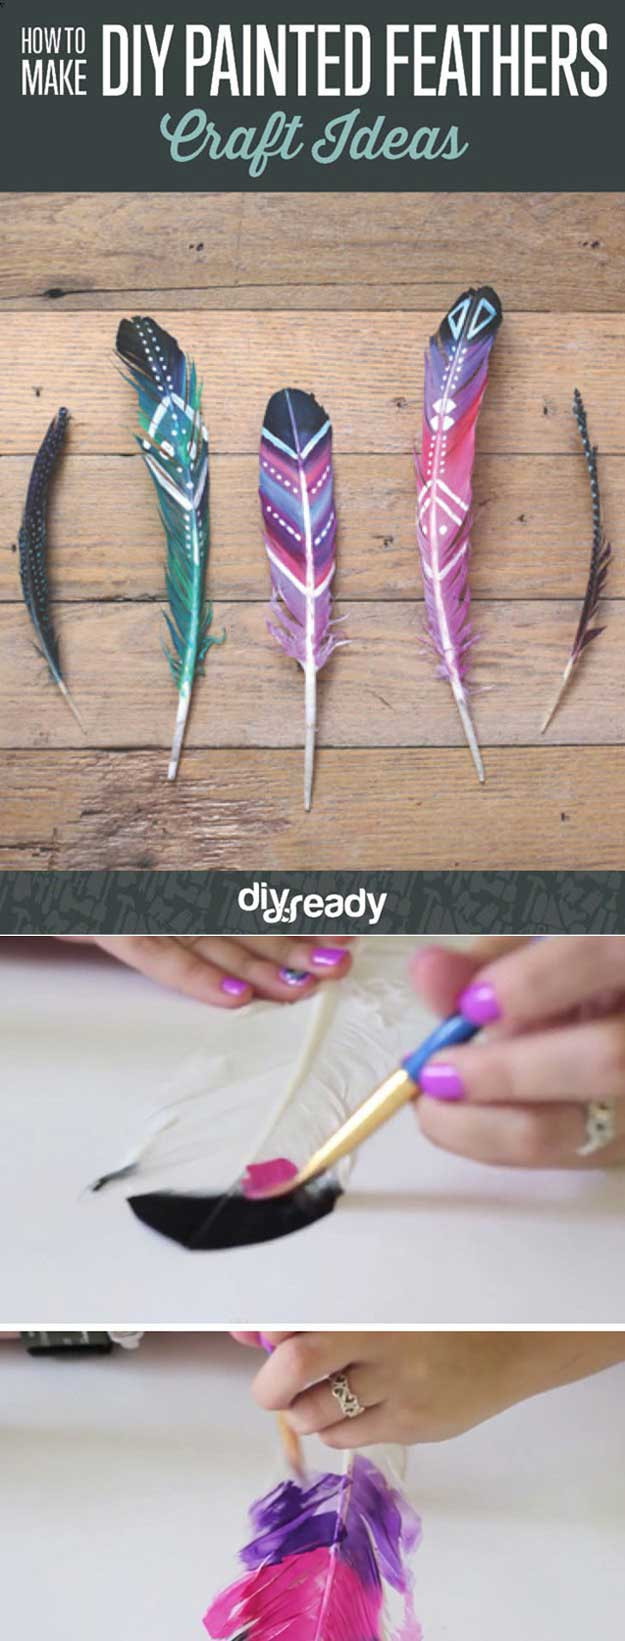 Easy Fun Crafts For Adults
 Teen DIY Projects for Girls DIY Projects Craft Ideas & How